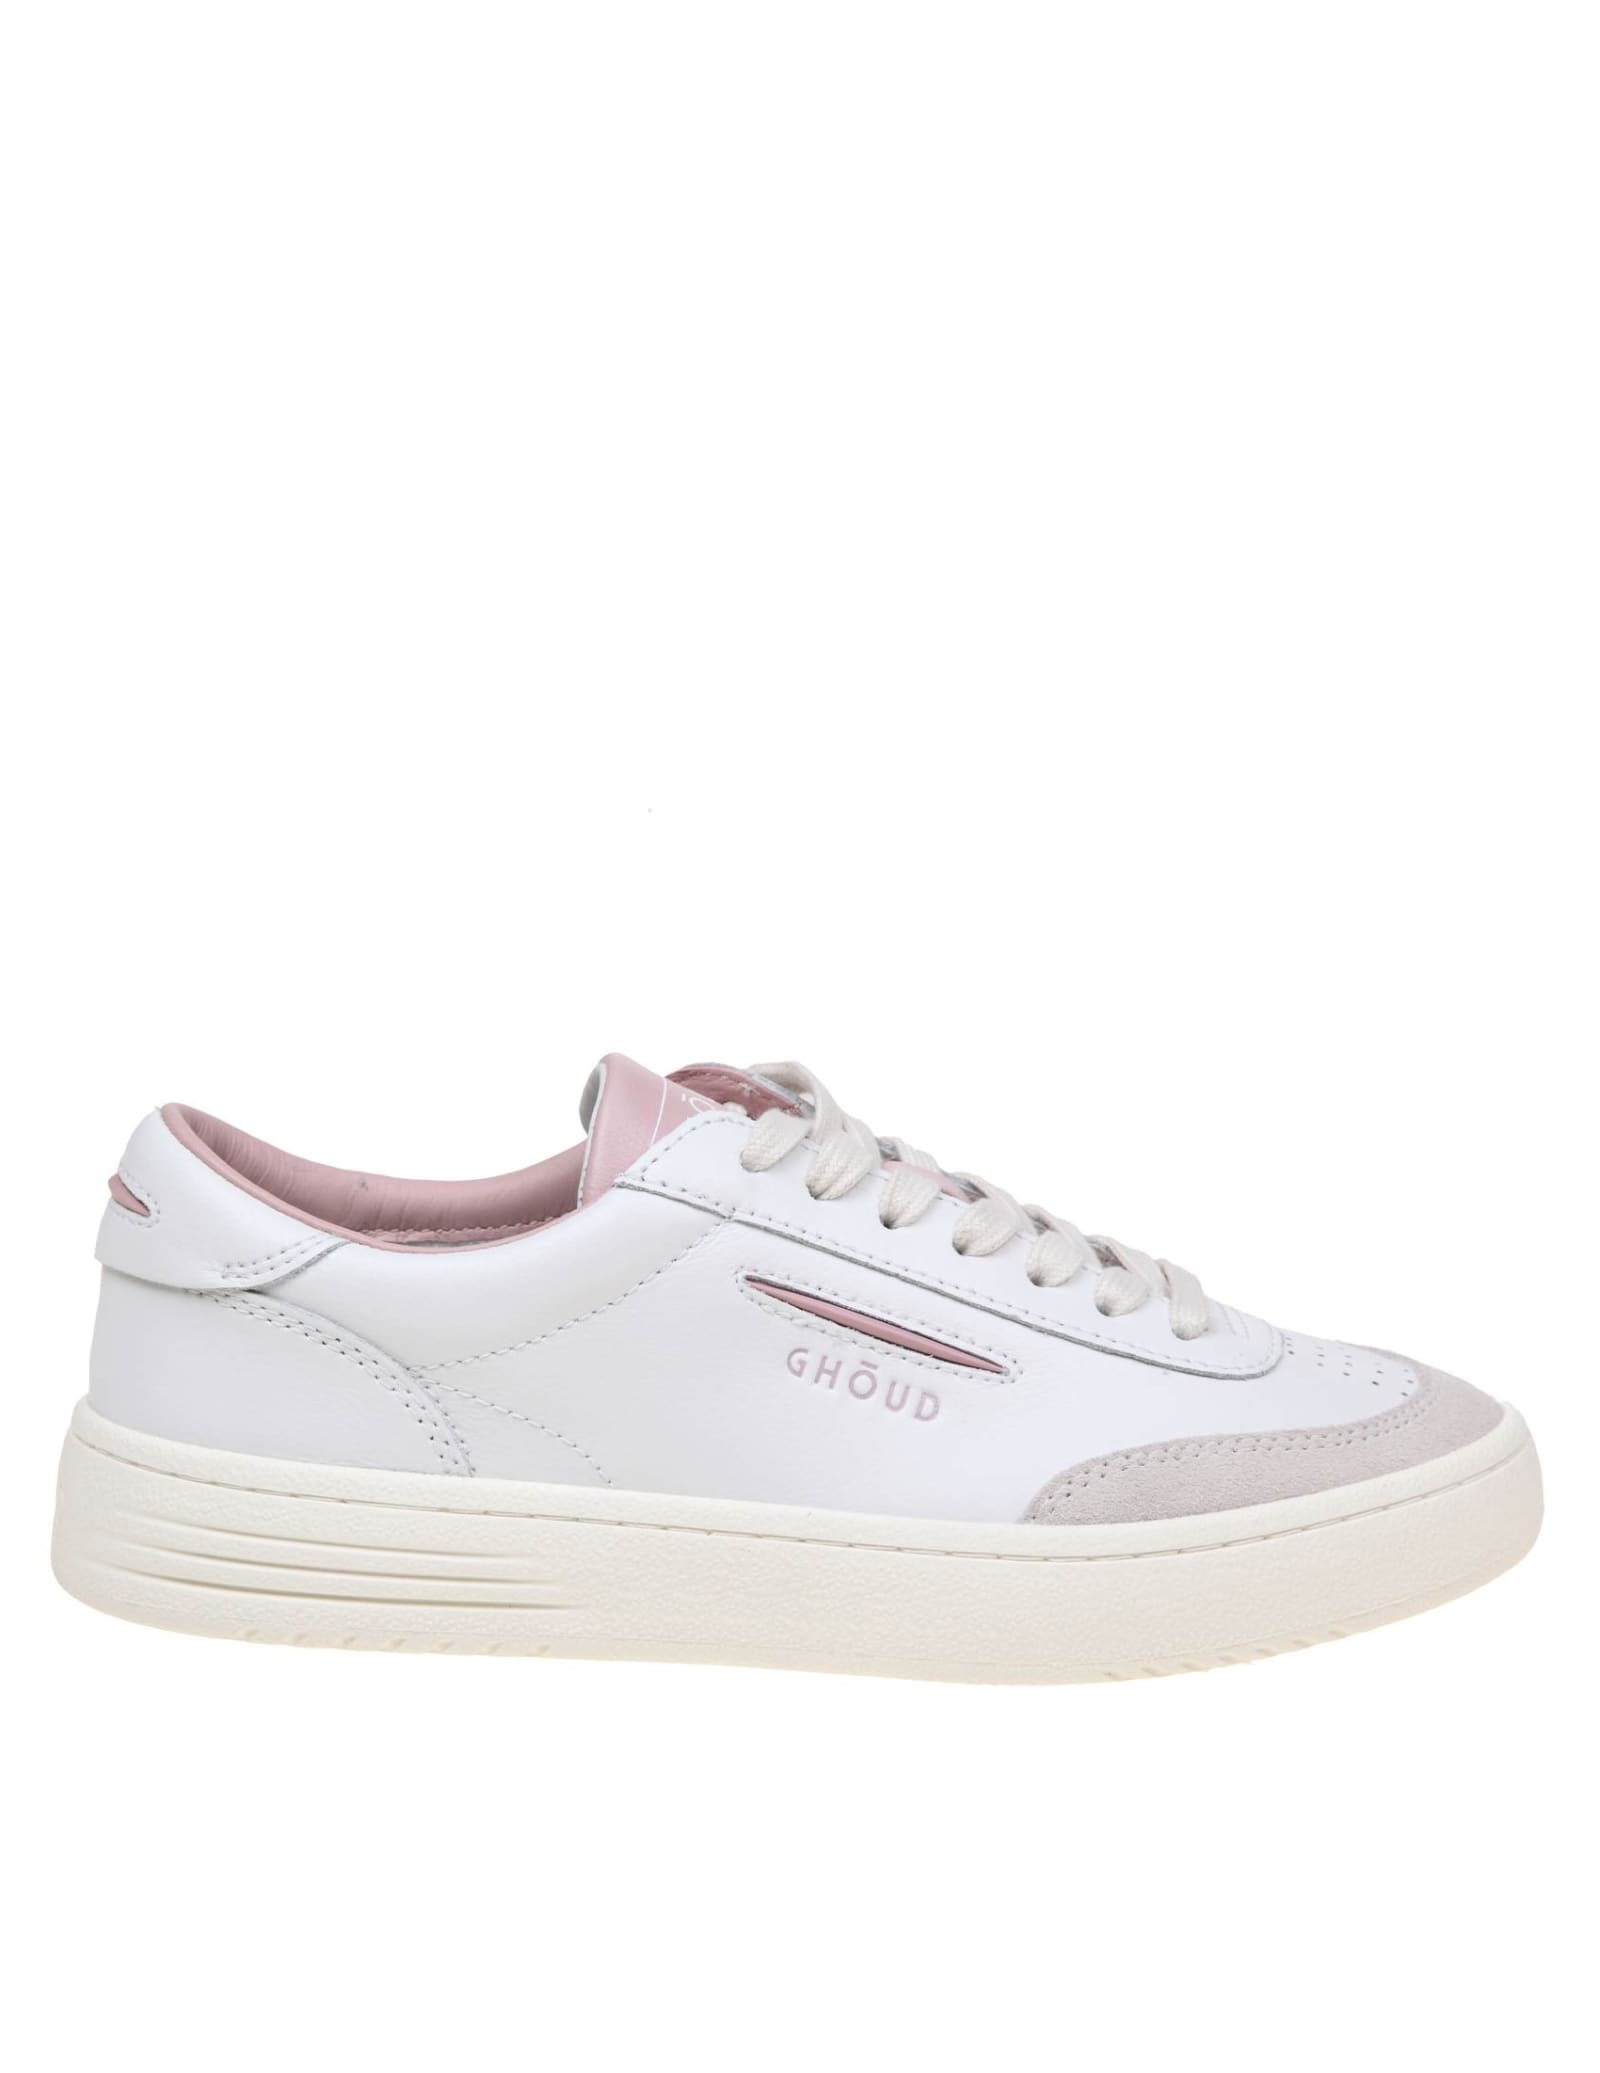 Ghoud Lido Low Sneakers In White/pink Leather And Suede